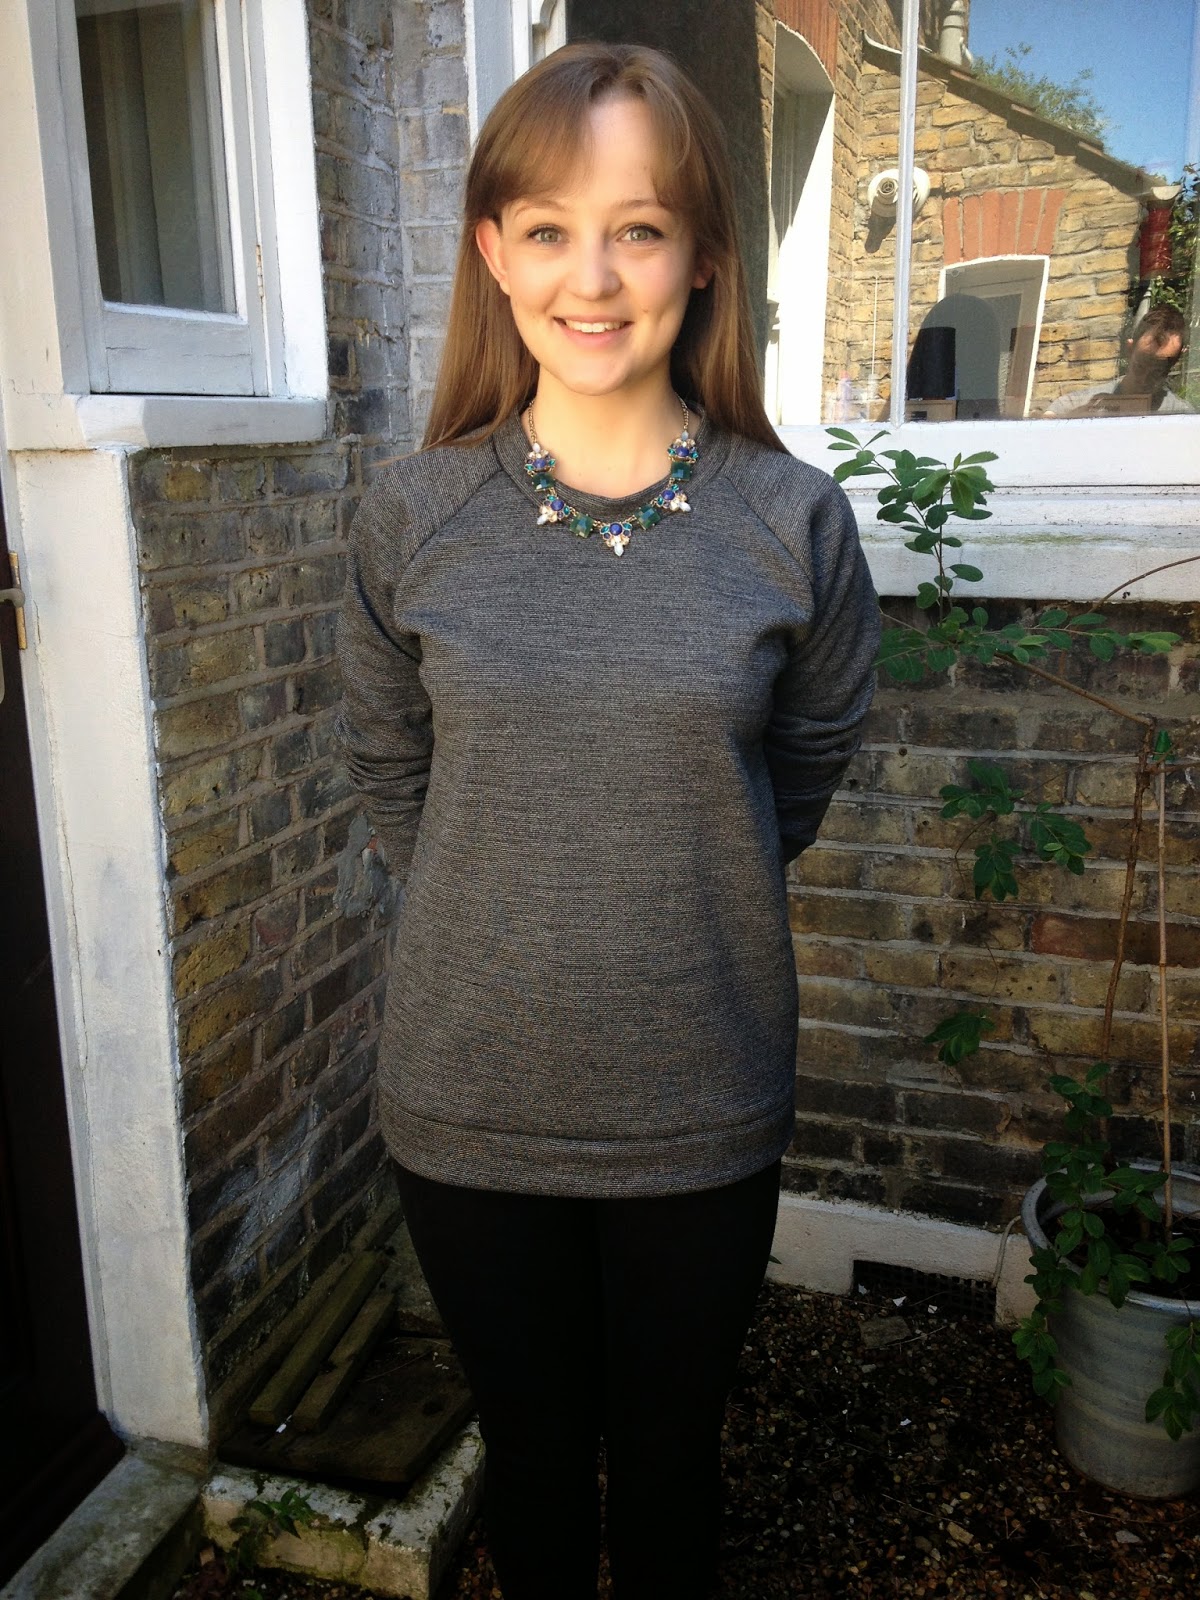 Diary of a Chainstitcher: The White Russian Sweatshirt from Capital Chic Sewing Patterns